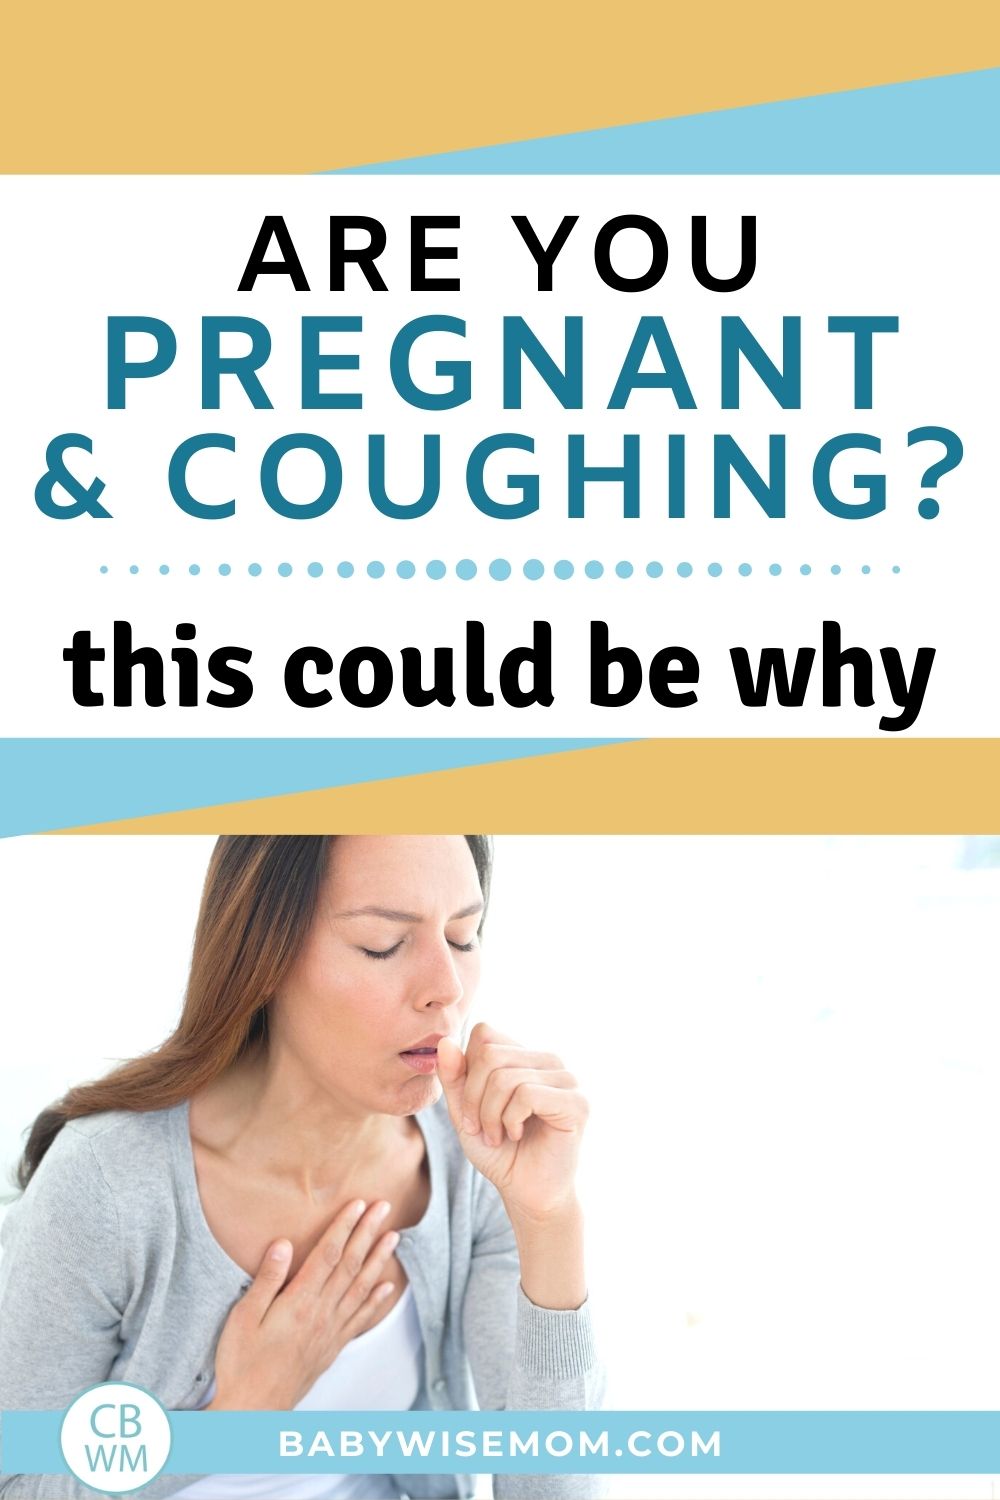 pregnant and coughing pinnable image